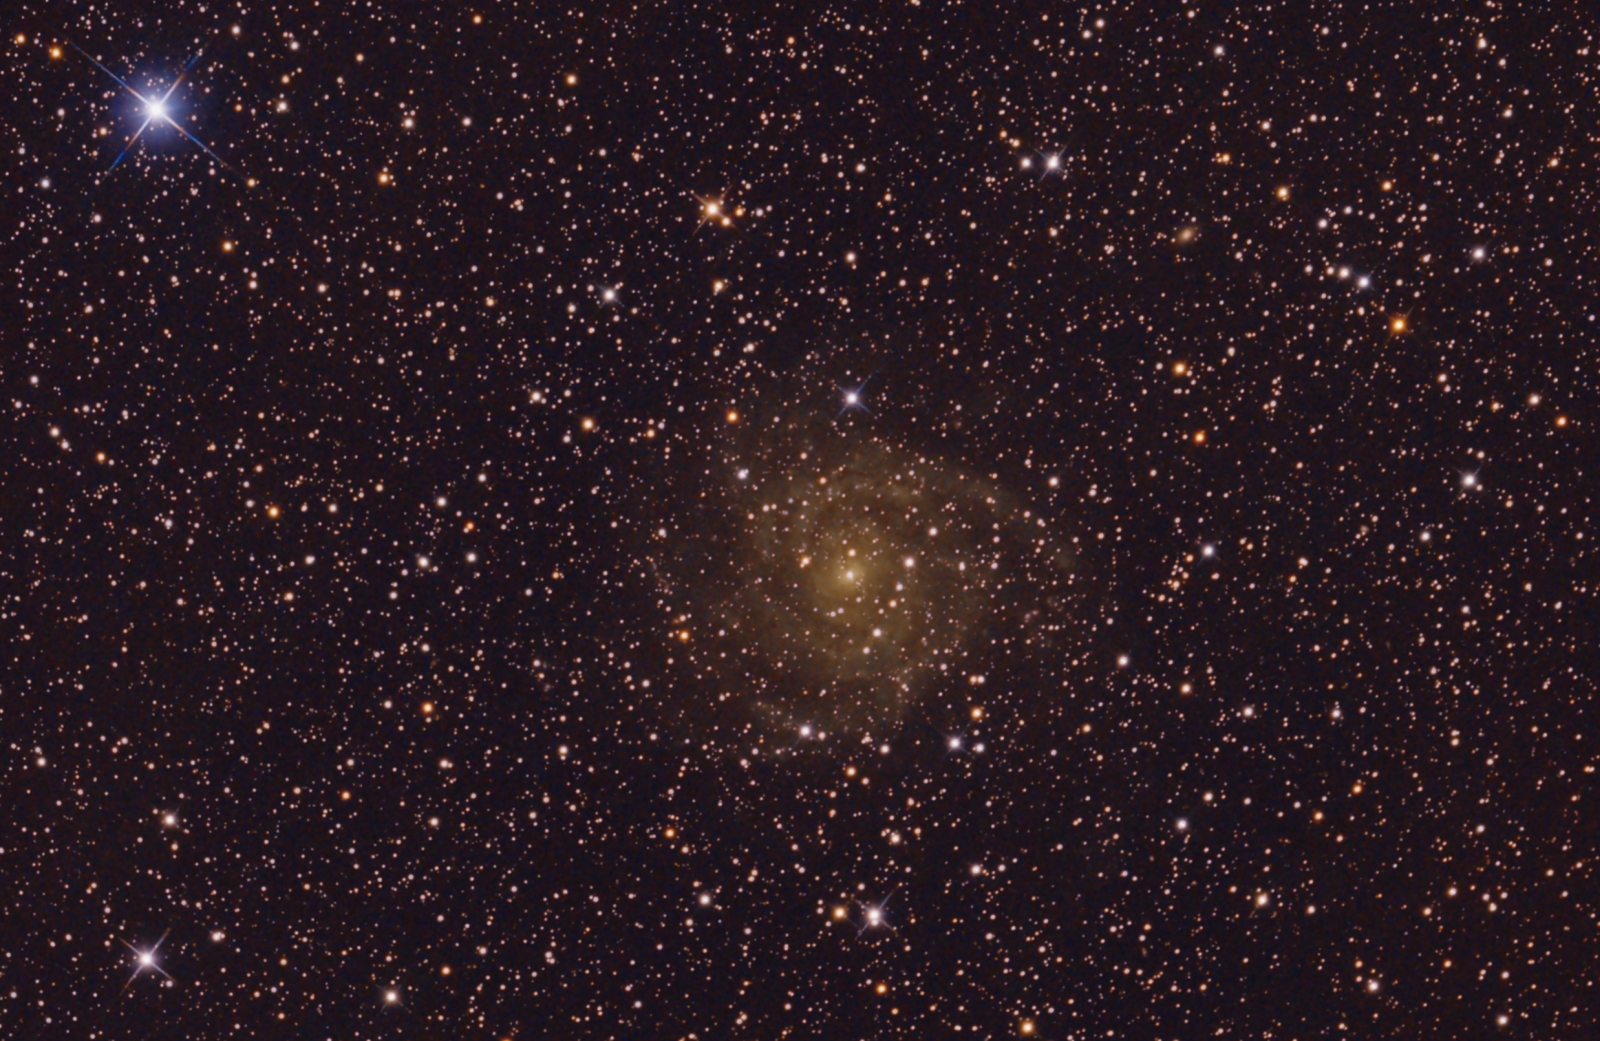 Galaxy IC 342 in Camelopardalis, 6" f/4 Newton at f/3, mod. Canon 77d, 330x32 sec, no filter, no guiding, no darks, only flats and biasse;